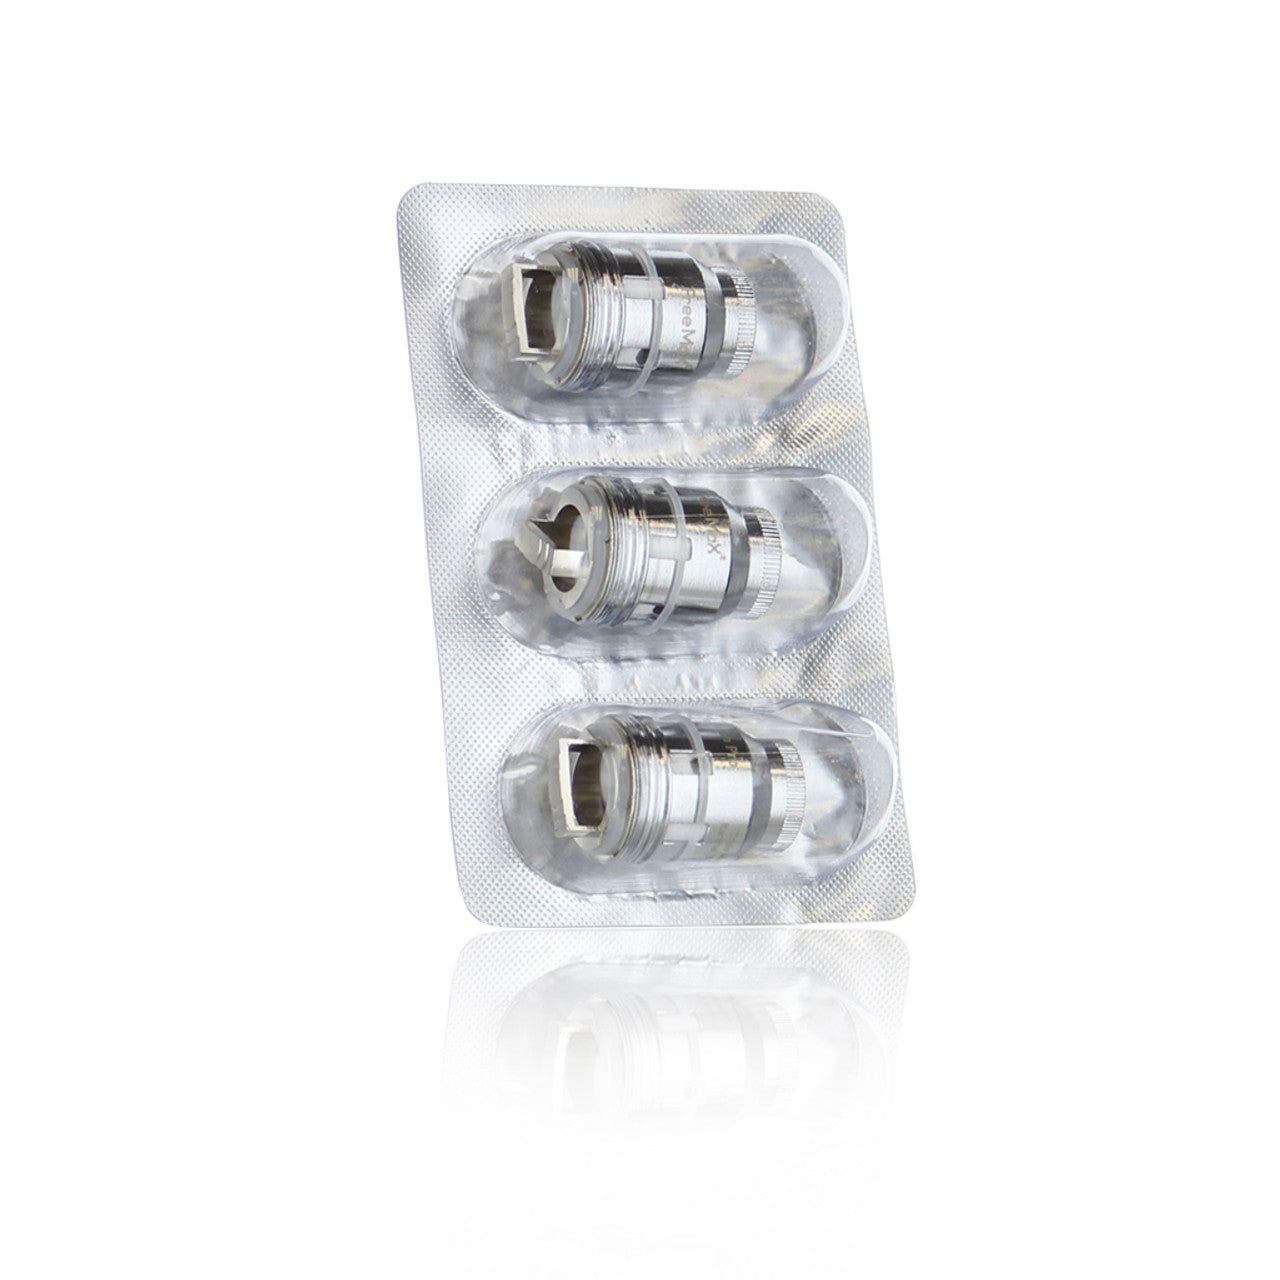 FreeMax Mesh Pro Replacement Coils (Pack of 3)